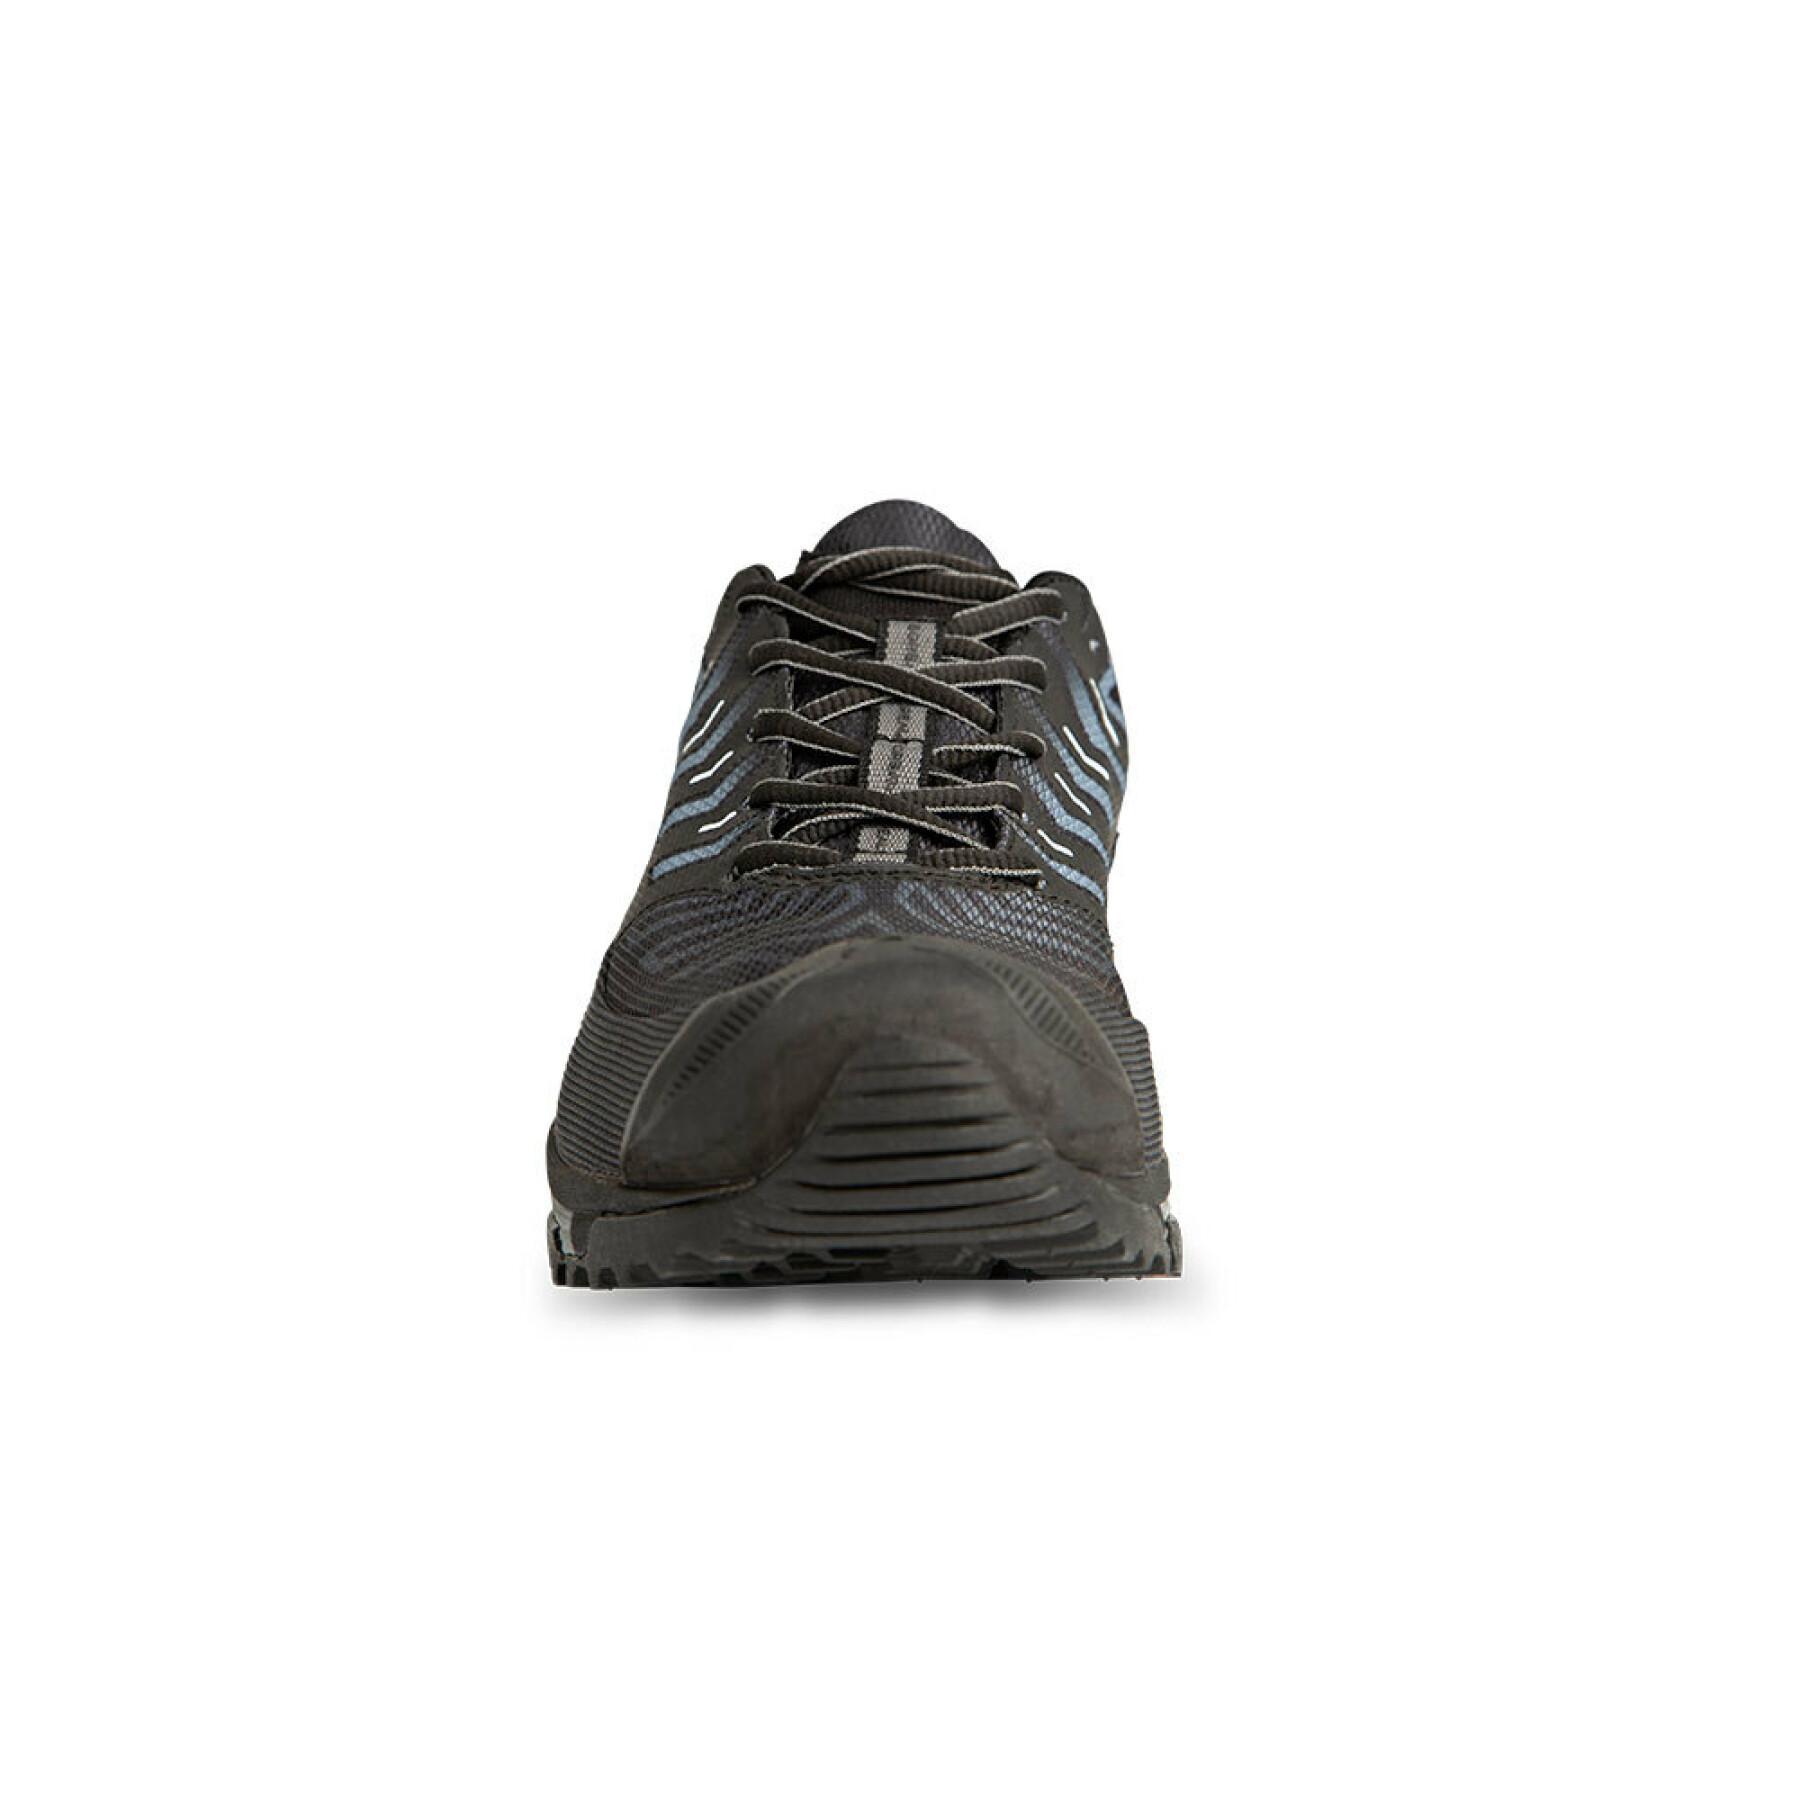 Trail running shoes Boreal Alligator